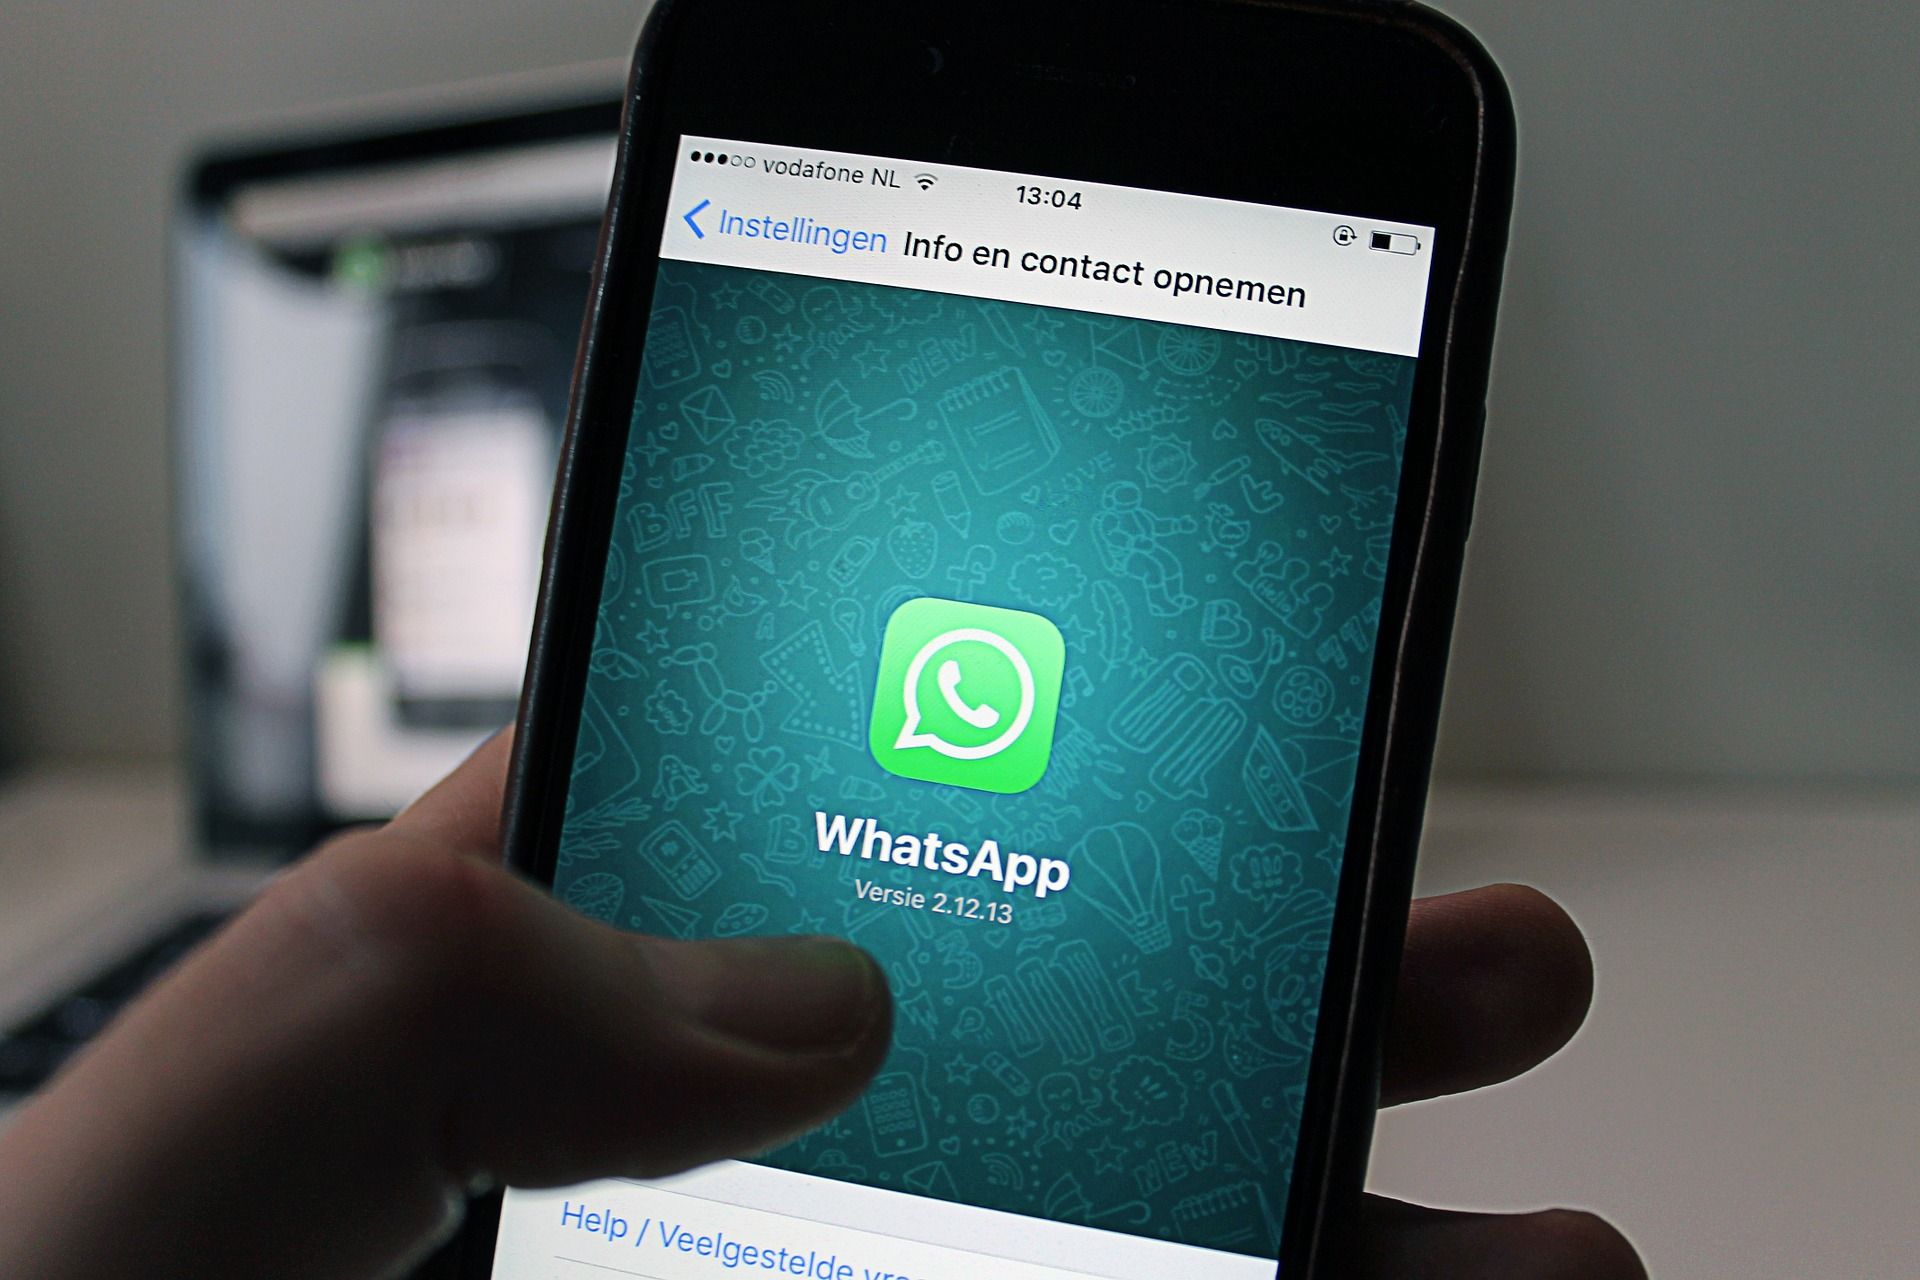 Terrorist groups in Pakistan abandon WhatsApp, Facebook, shift to new messaging apps over privacy concern